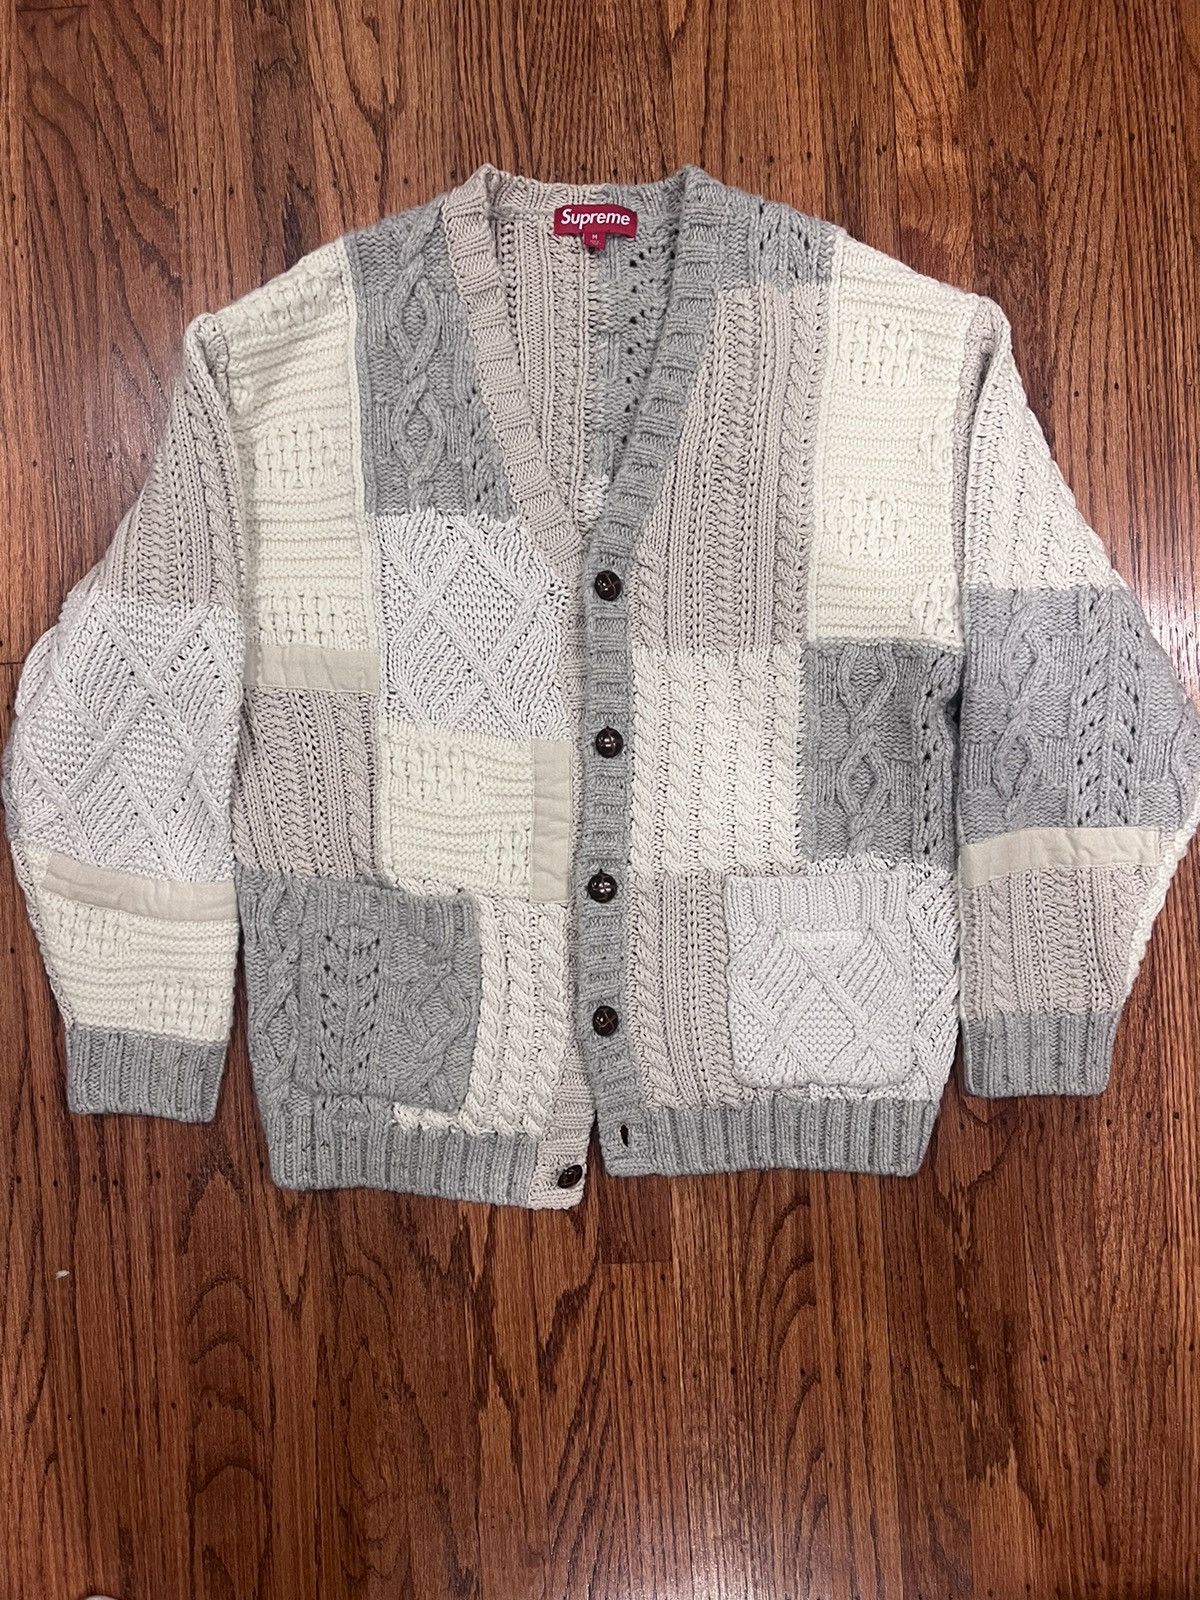 Supreme Supreme Patchwork Cable Knit Cardigan | Grailed